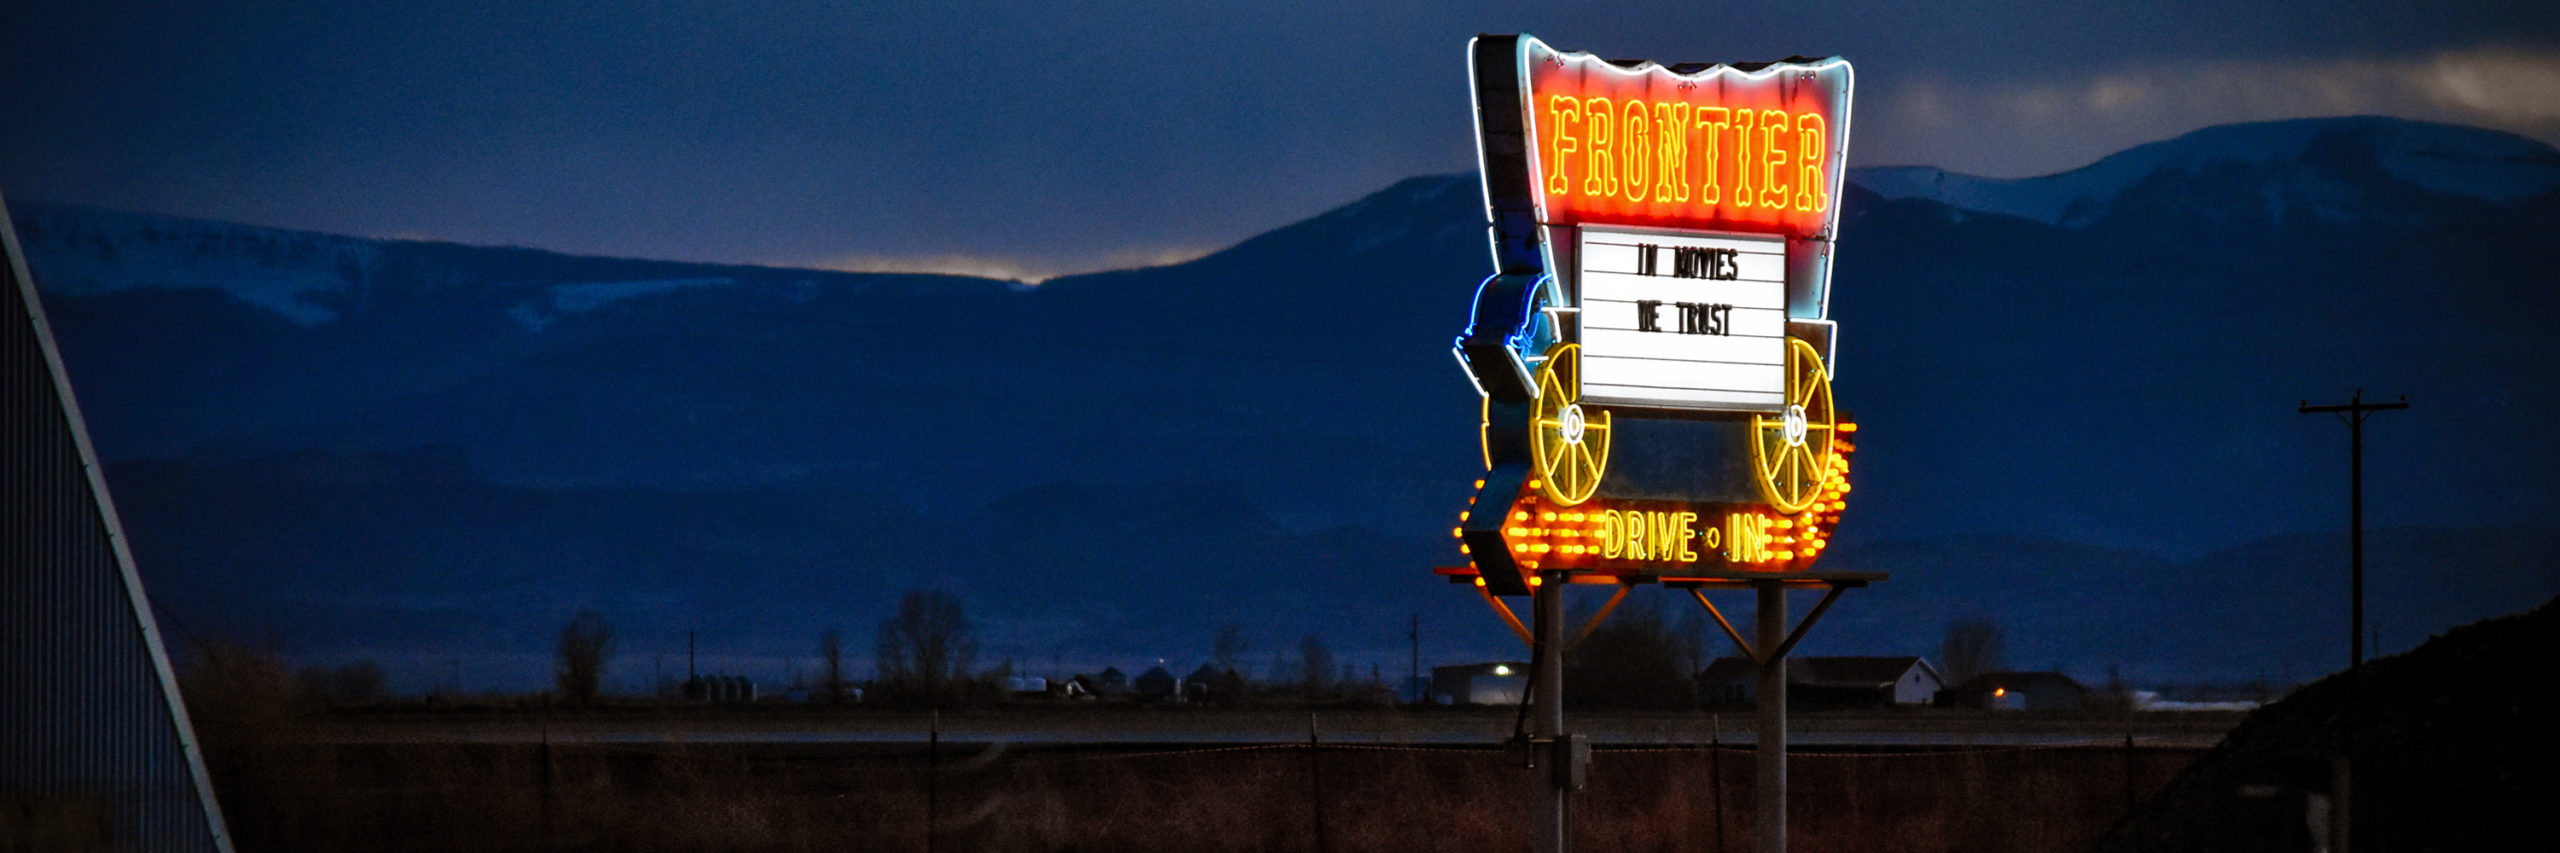 Neon Frontier Drive In sign shot at twilight, with mountains in the background